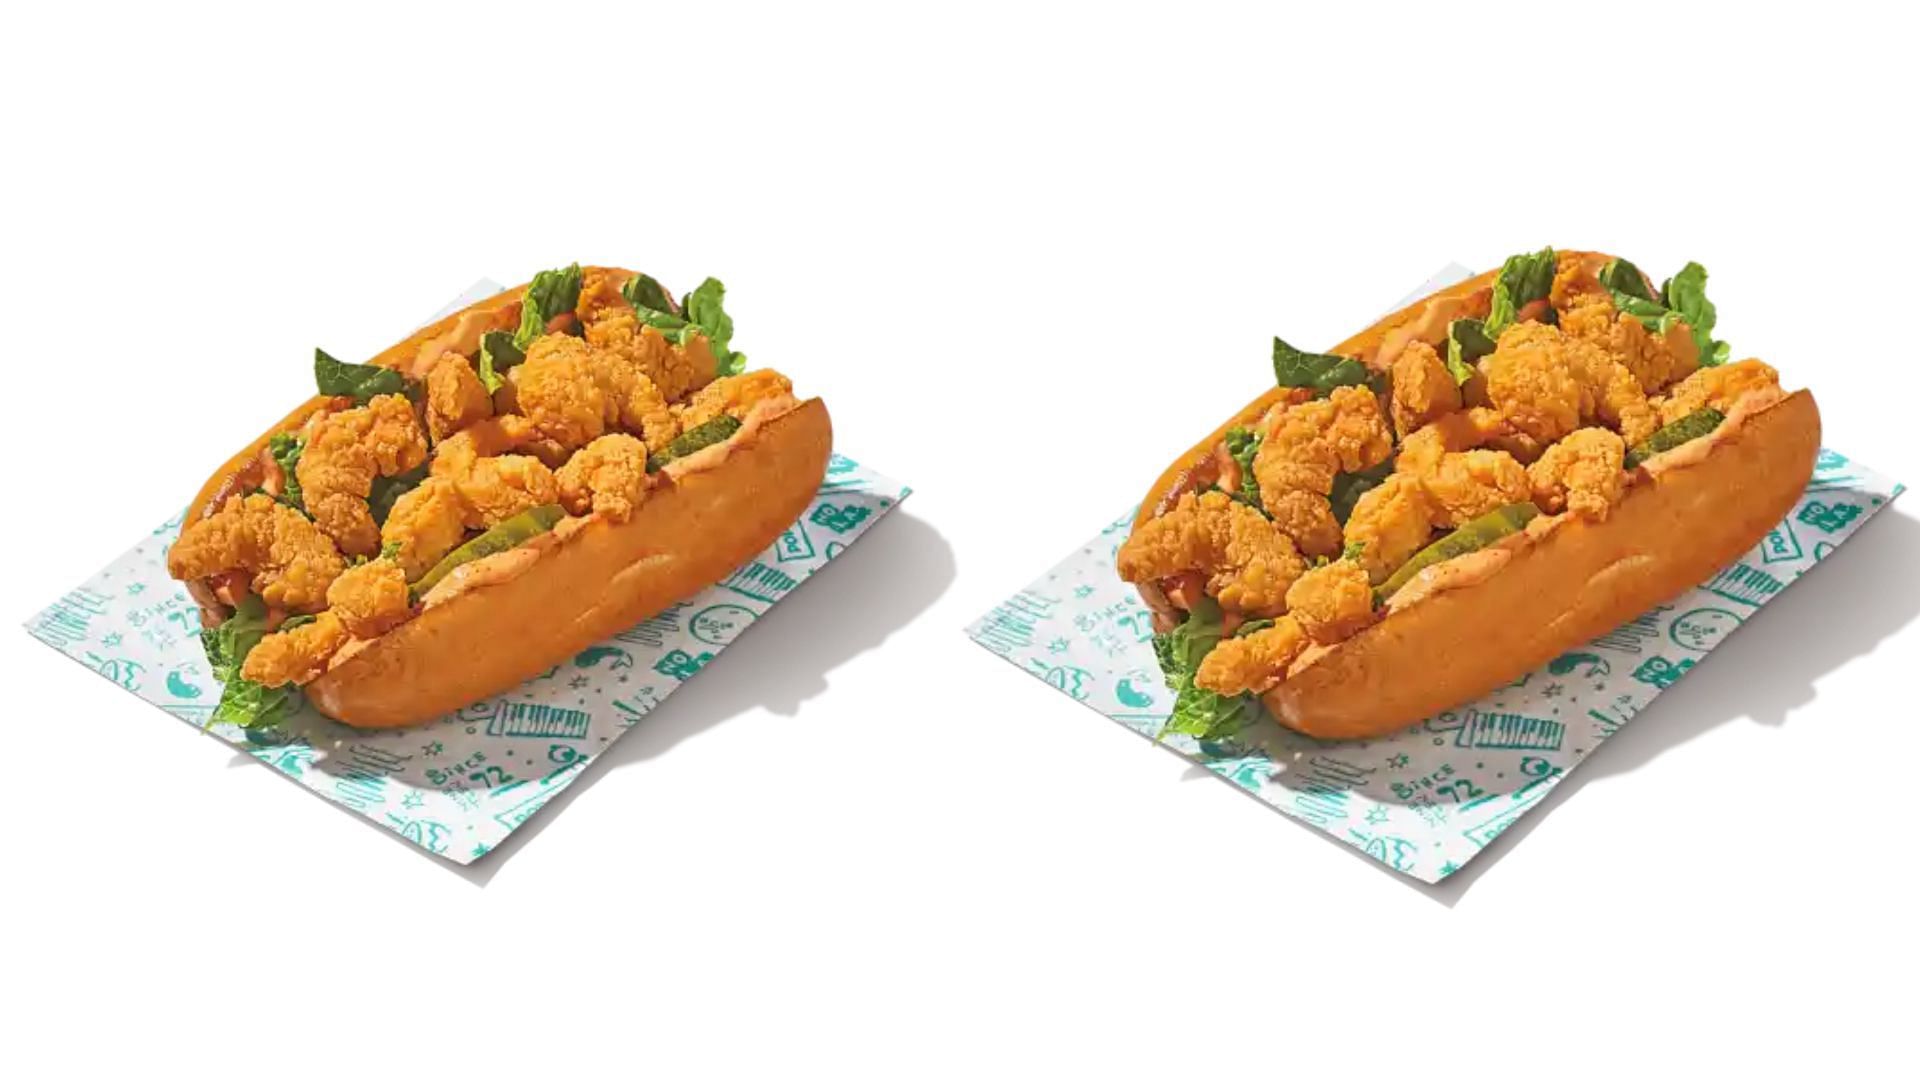 Popeyes introduces new Shrimp Roll to its seafood menu